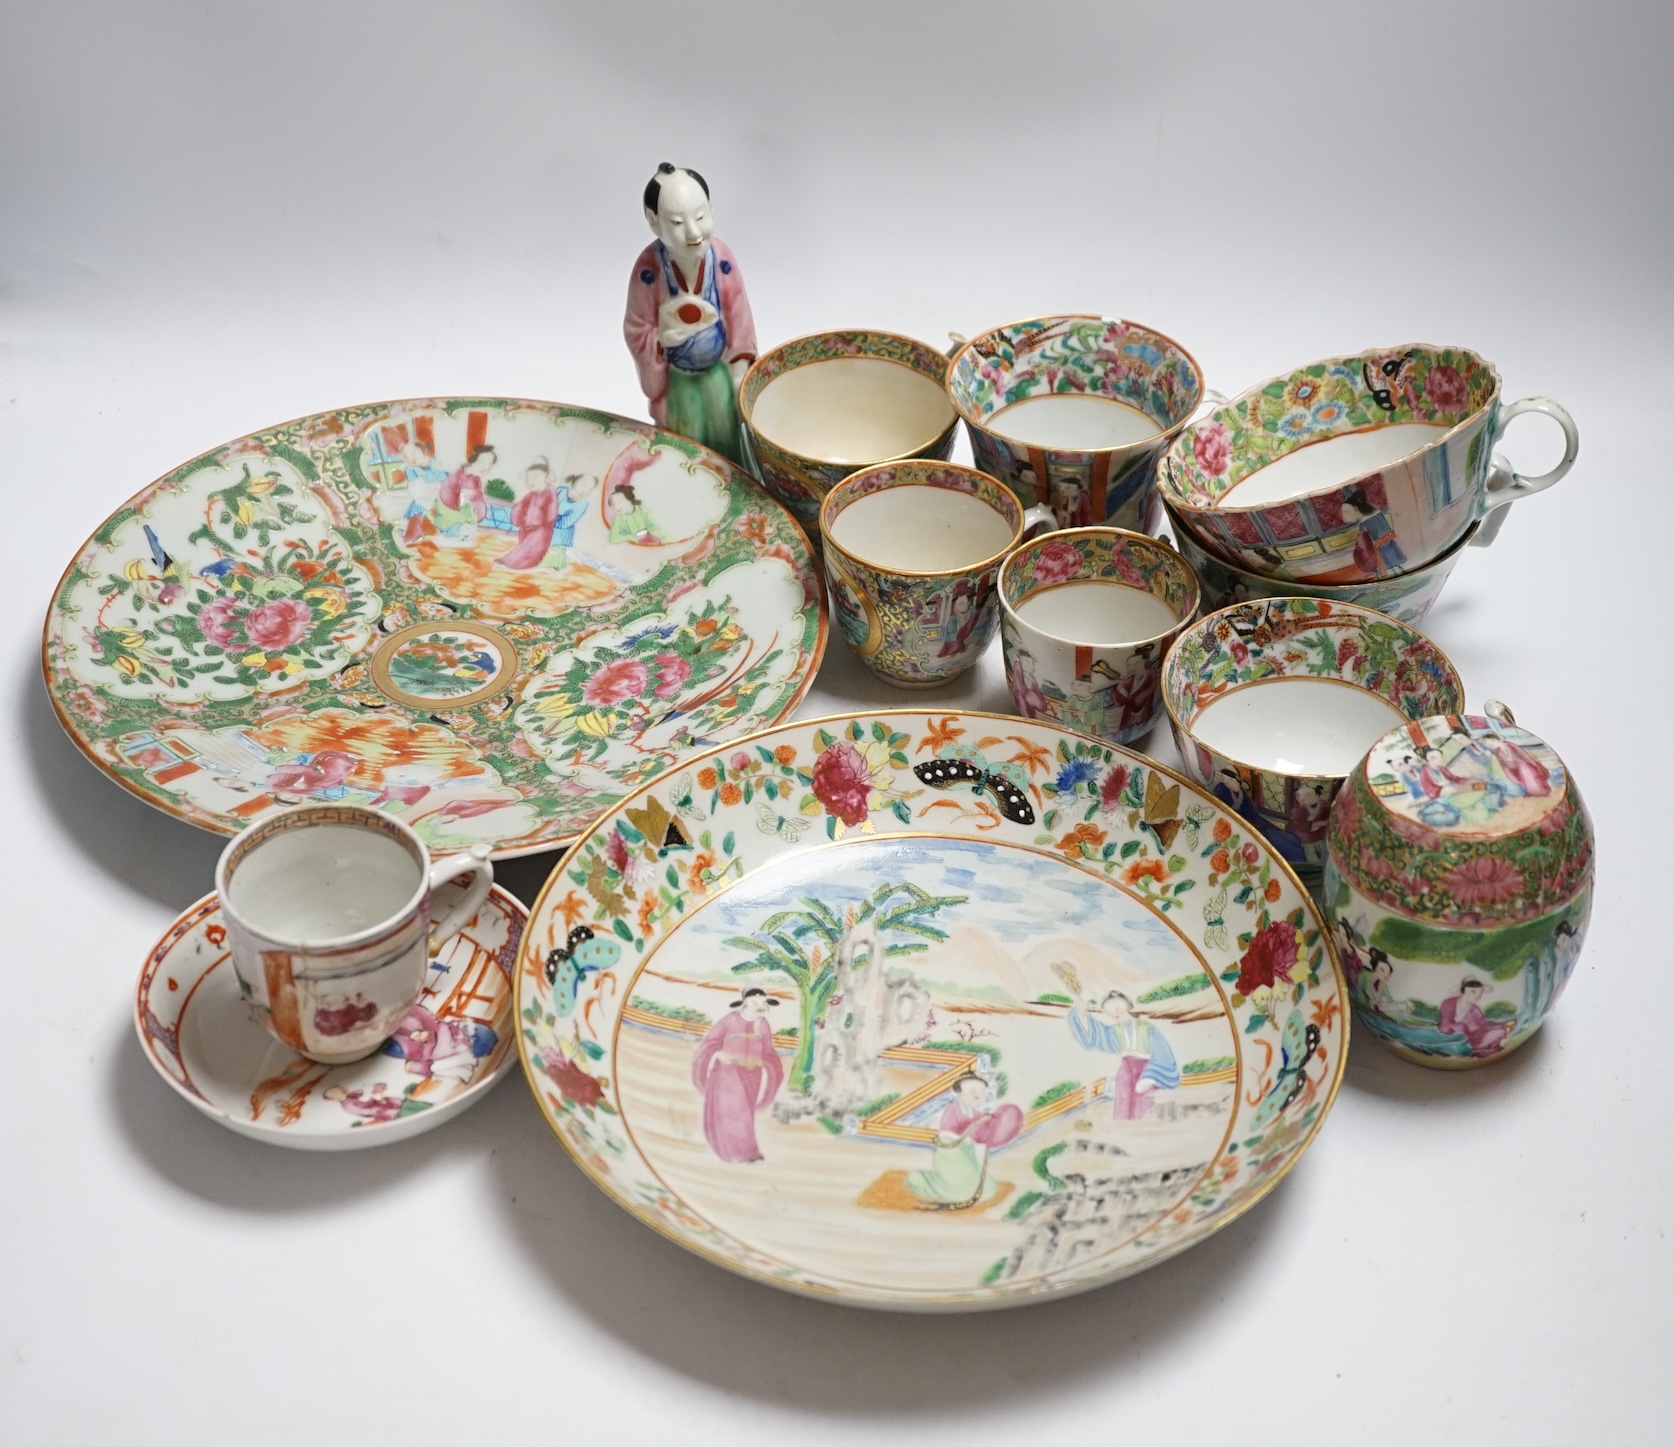 Chinese famille rose porcelain including plates, cups, saucers and a figure, 18th and 19th century, largest 27cm diameter